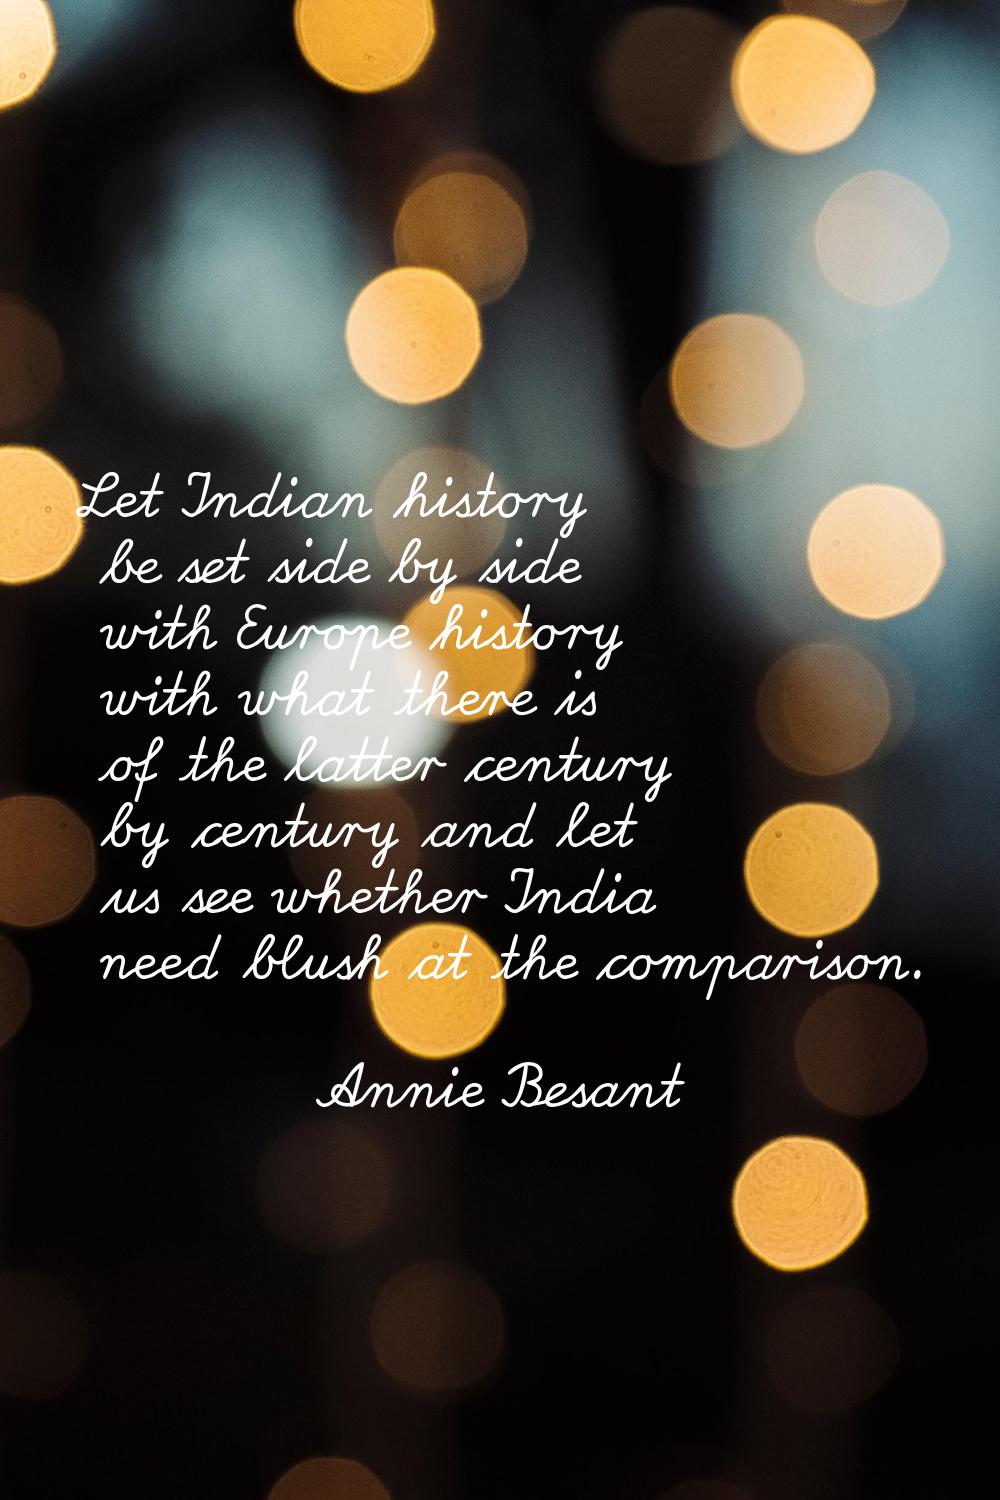 Let Indian history be set side by side with Europe history with what there is of the latter century